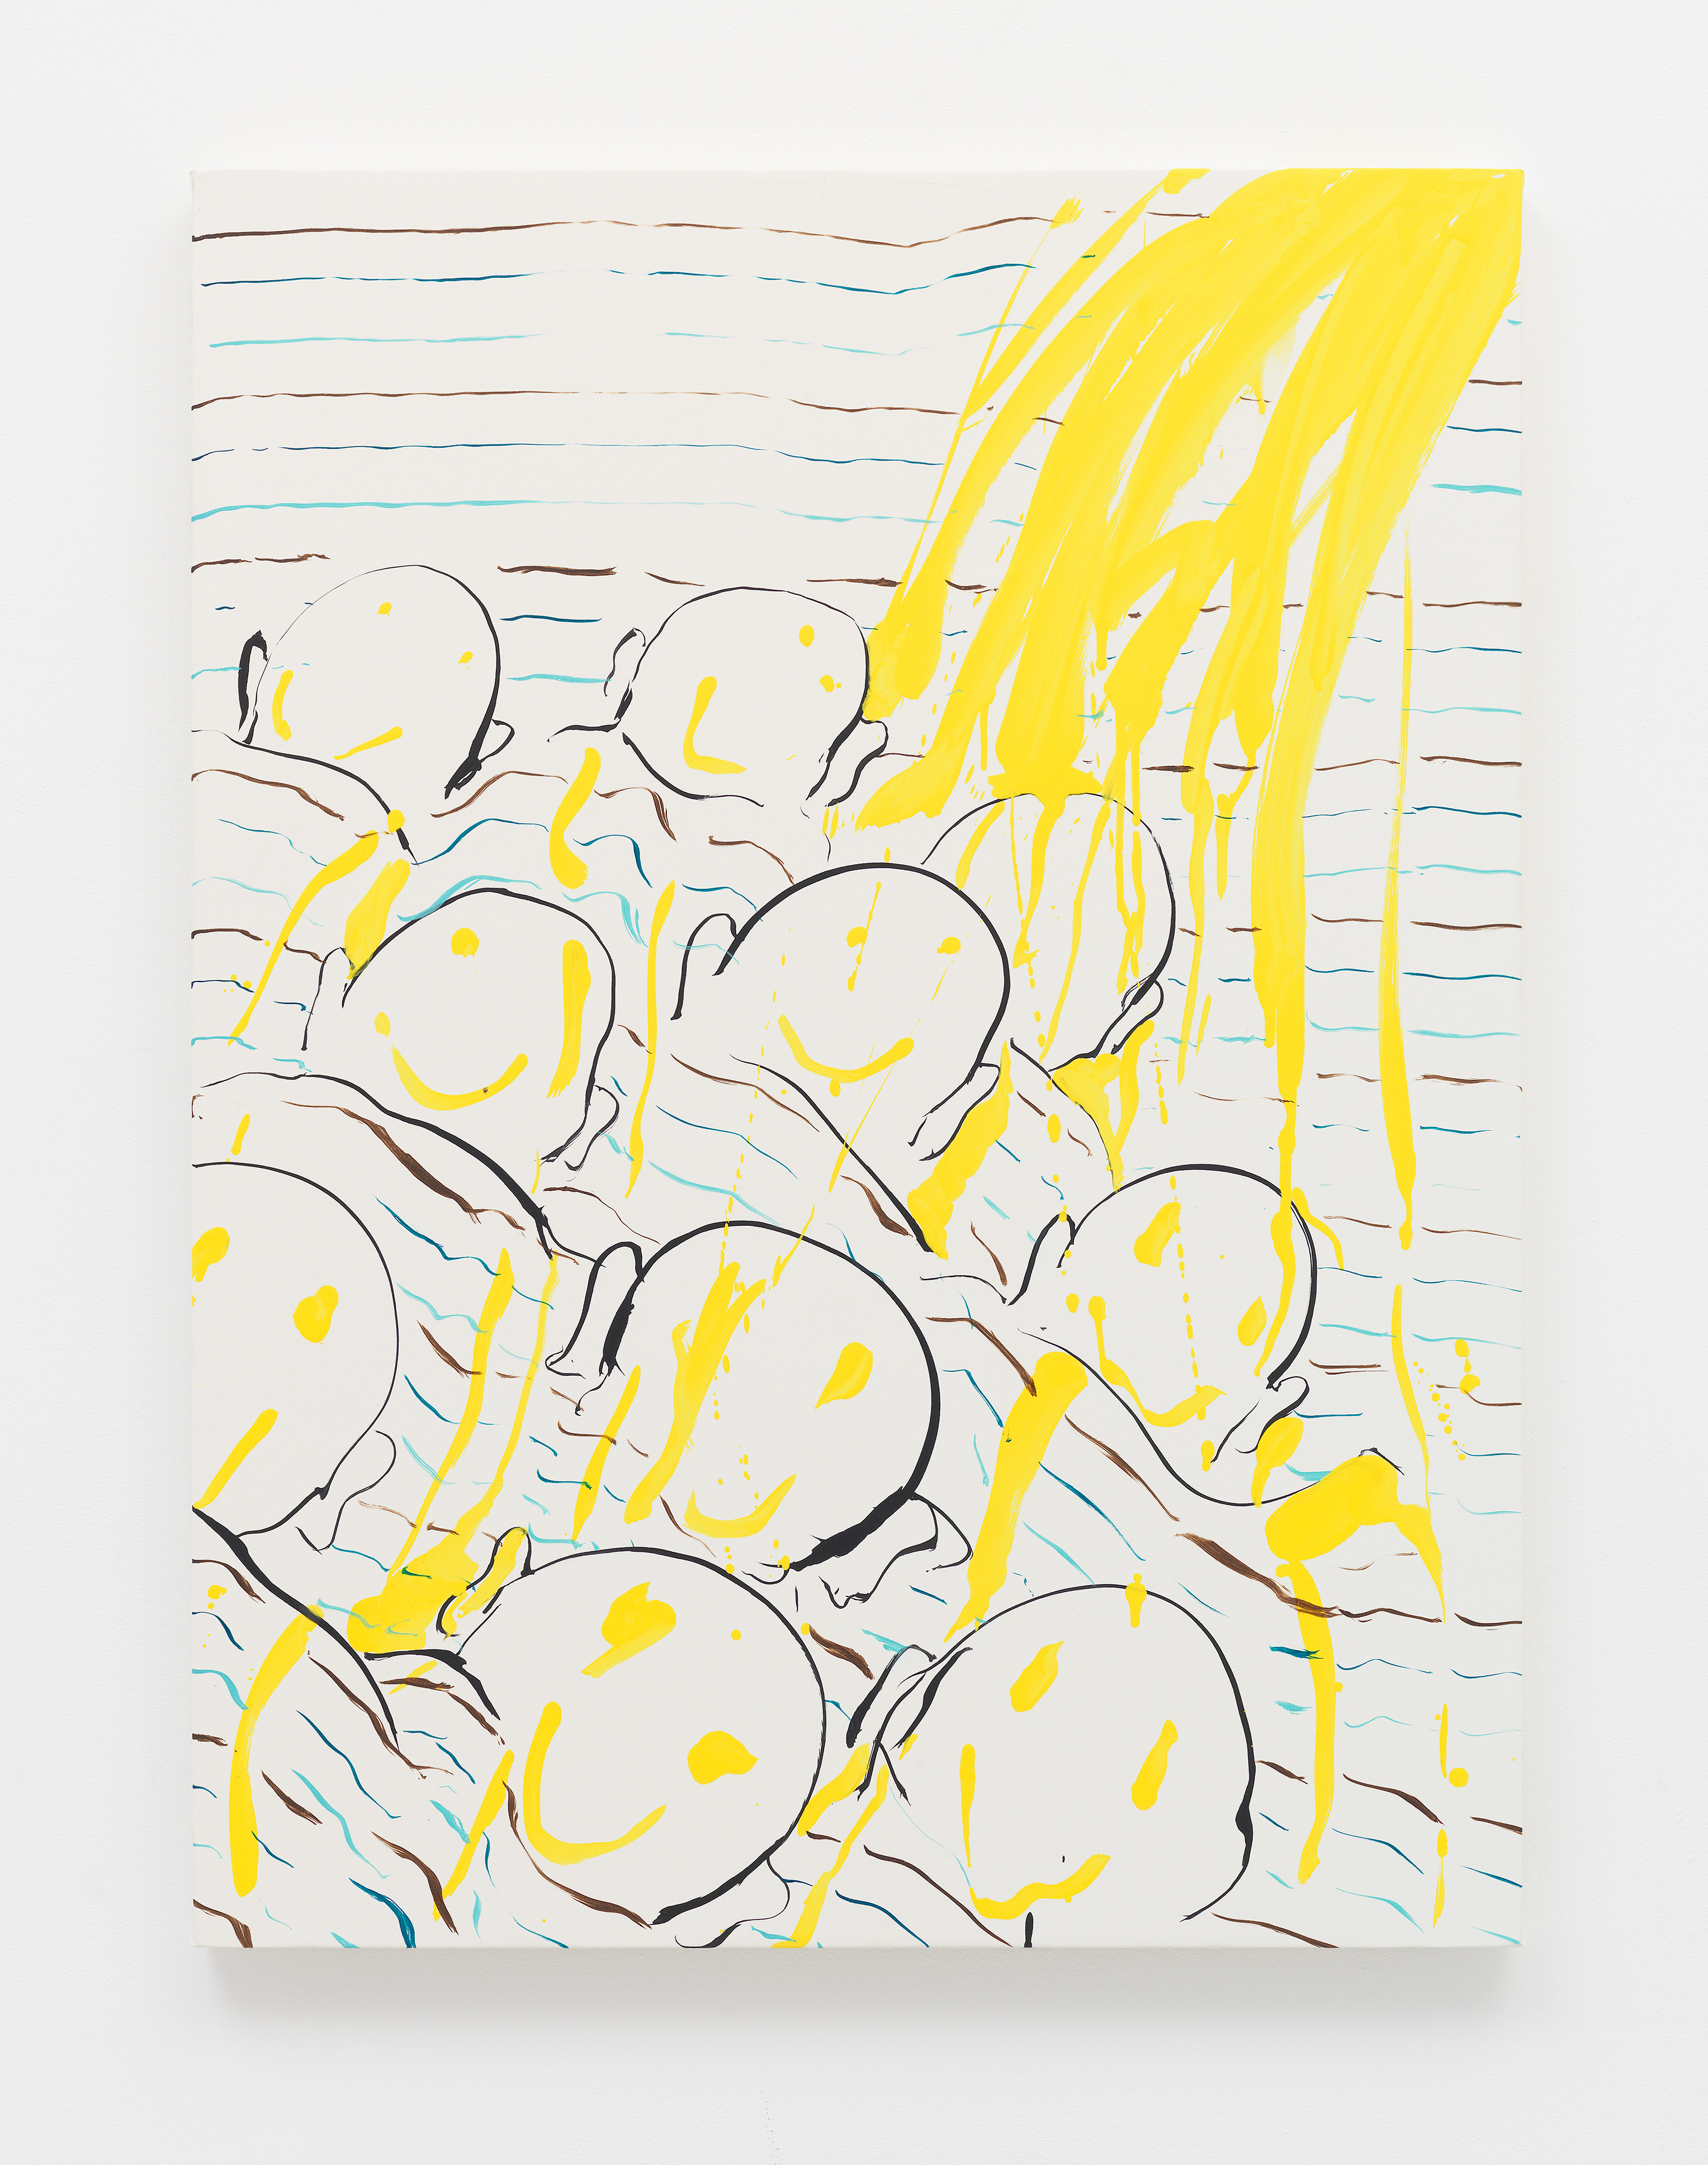 Tala Madani , Piss Smiley, 2011.  Oil on linen . 76.2 x 101.6 cm. Courtesy of the artist a